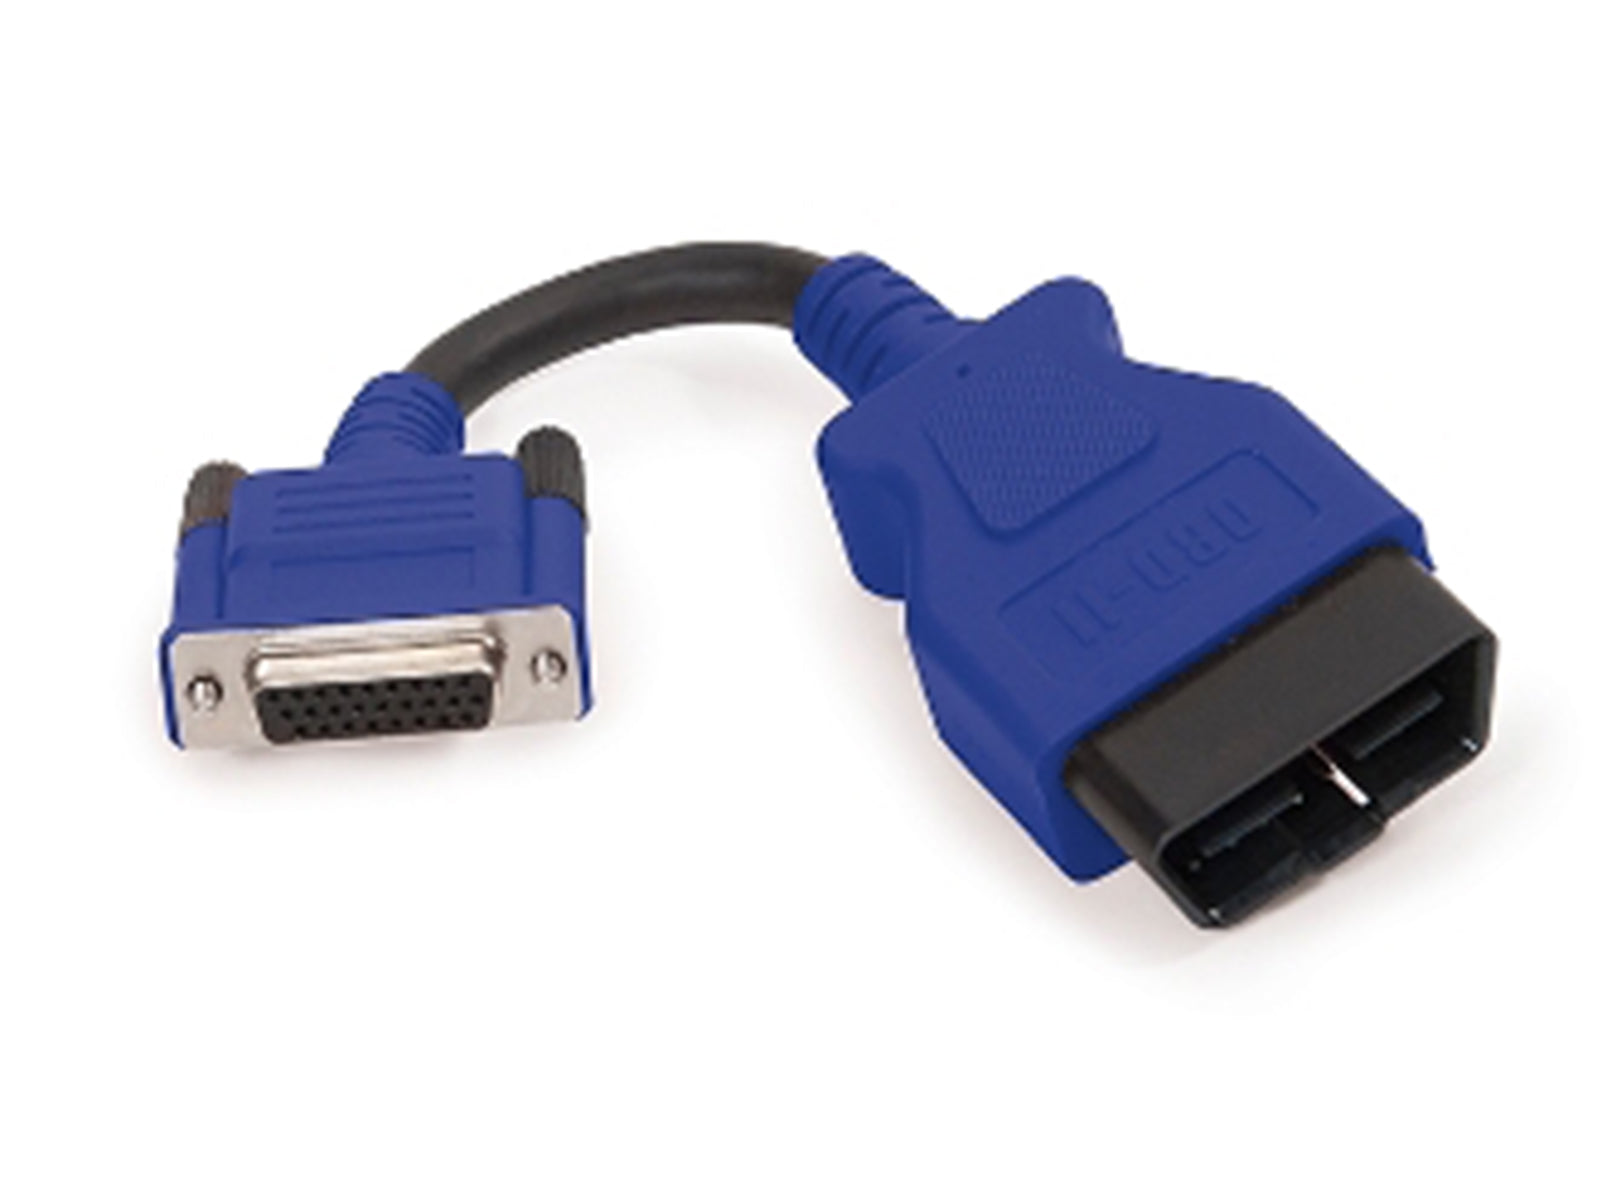 Nexiq OBDII Adapter Cable for USB Link 2 (493013) - Diesel Laptops